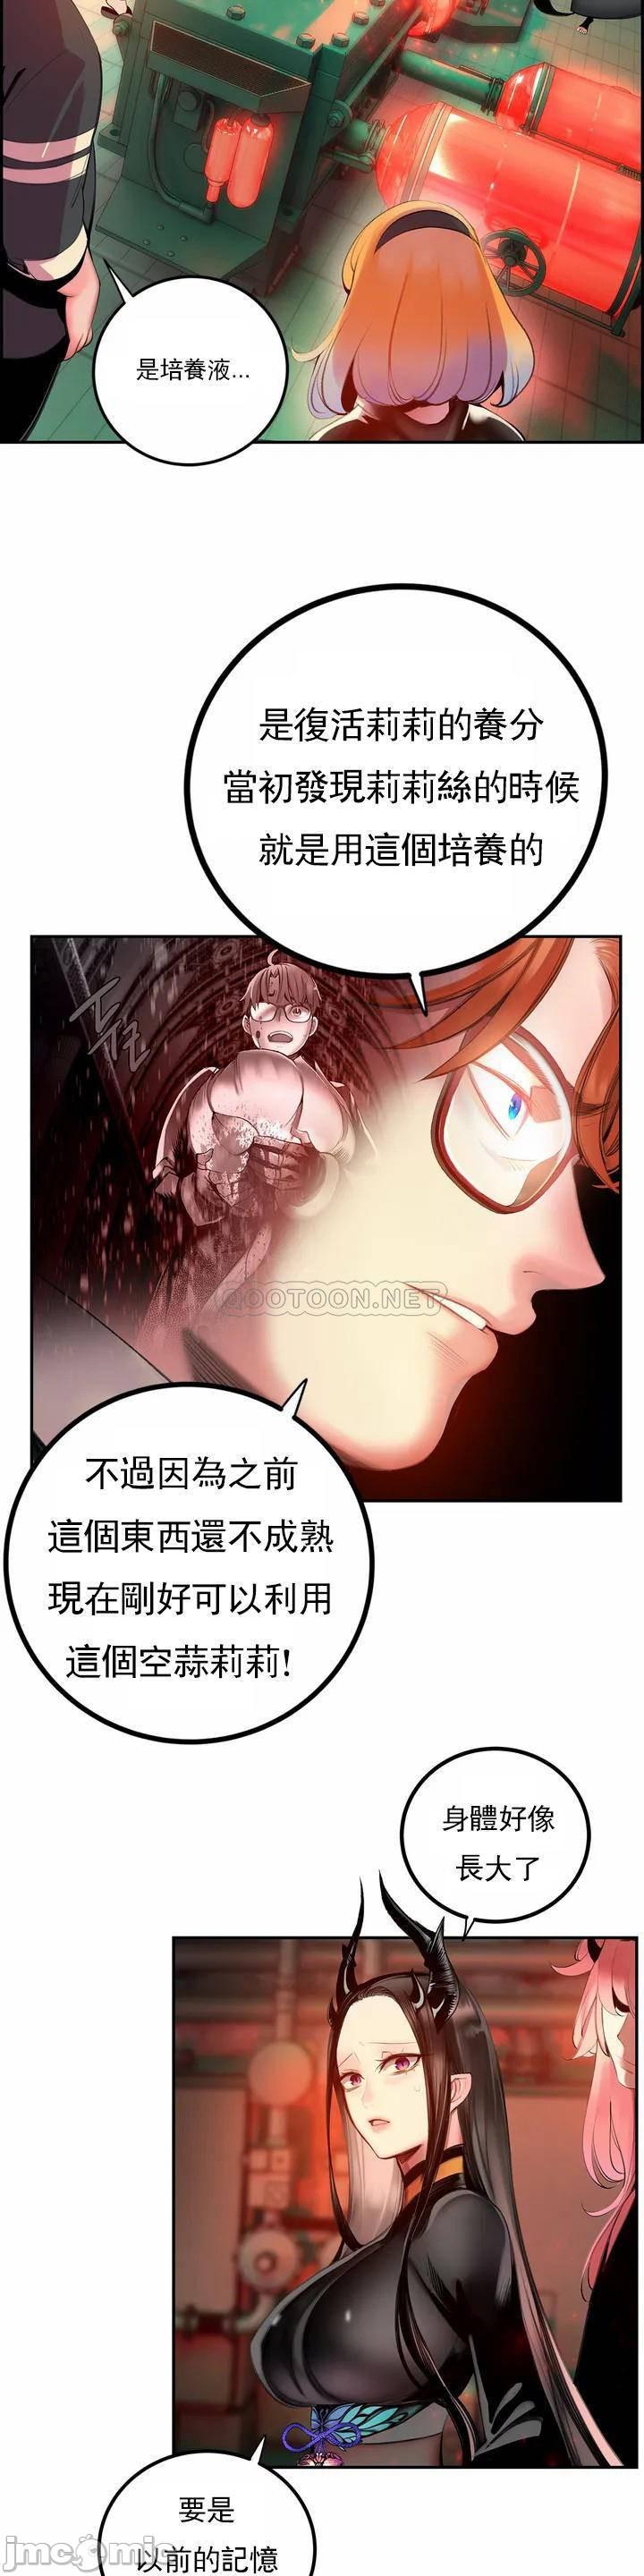 [Juder] Lilith`s Cord (第二季) Ch.77-93 end [Chinese] 489